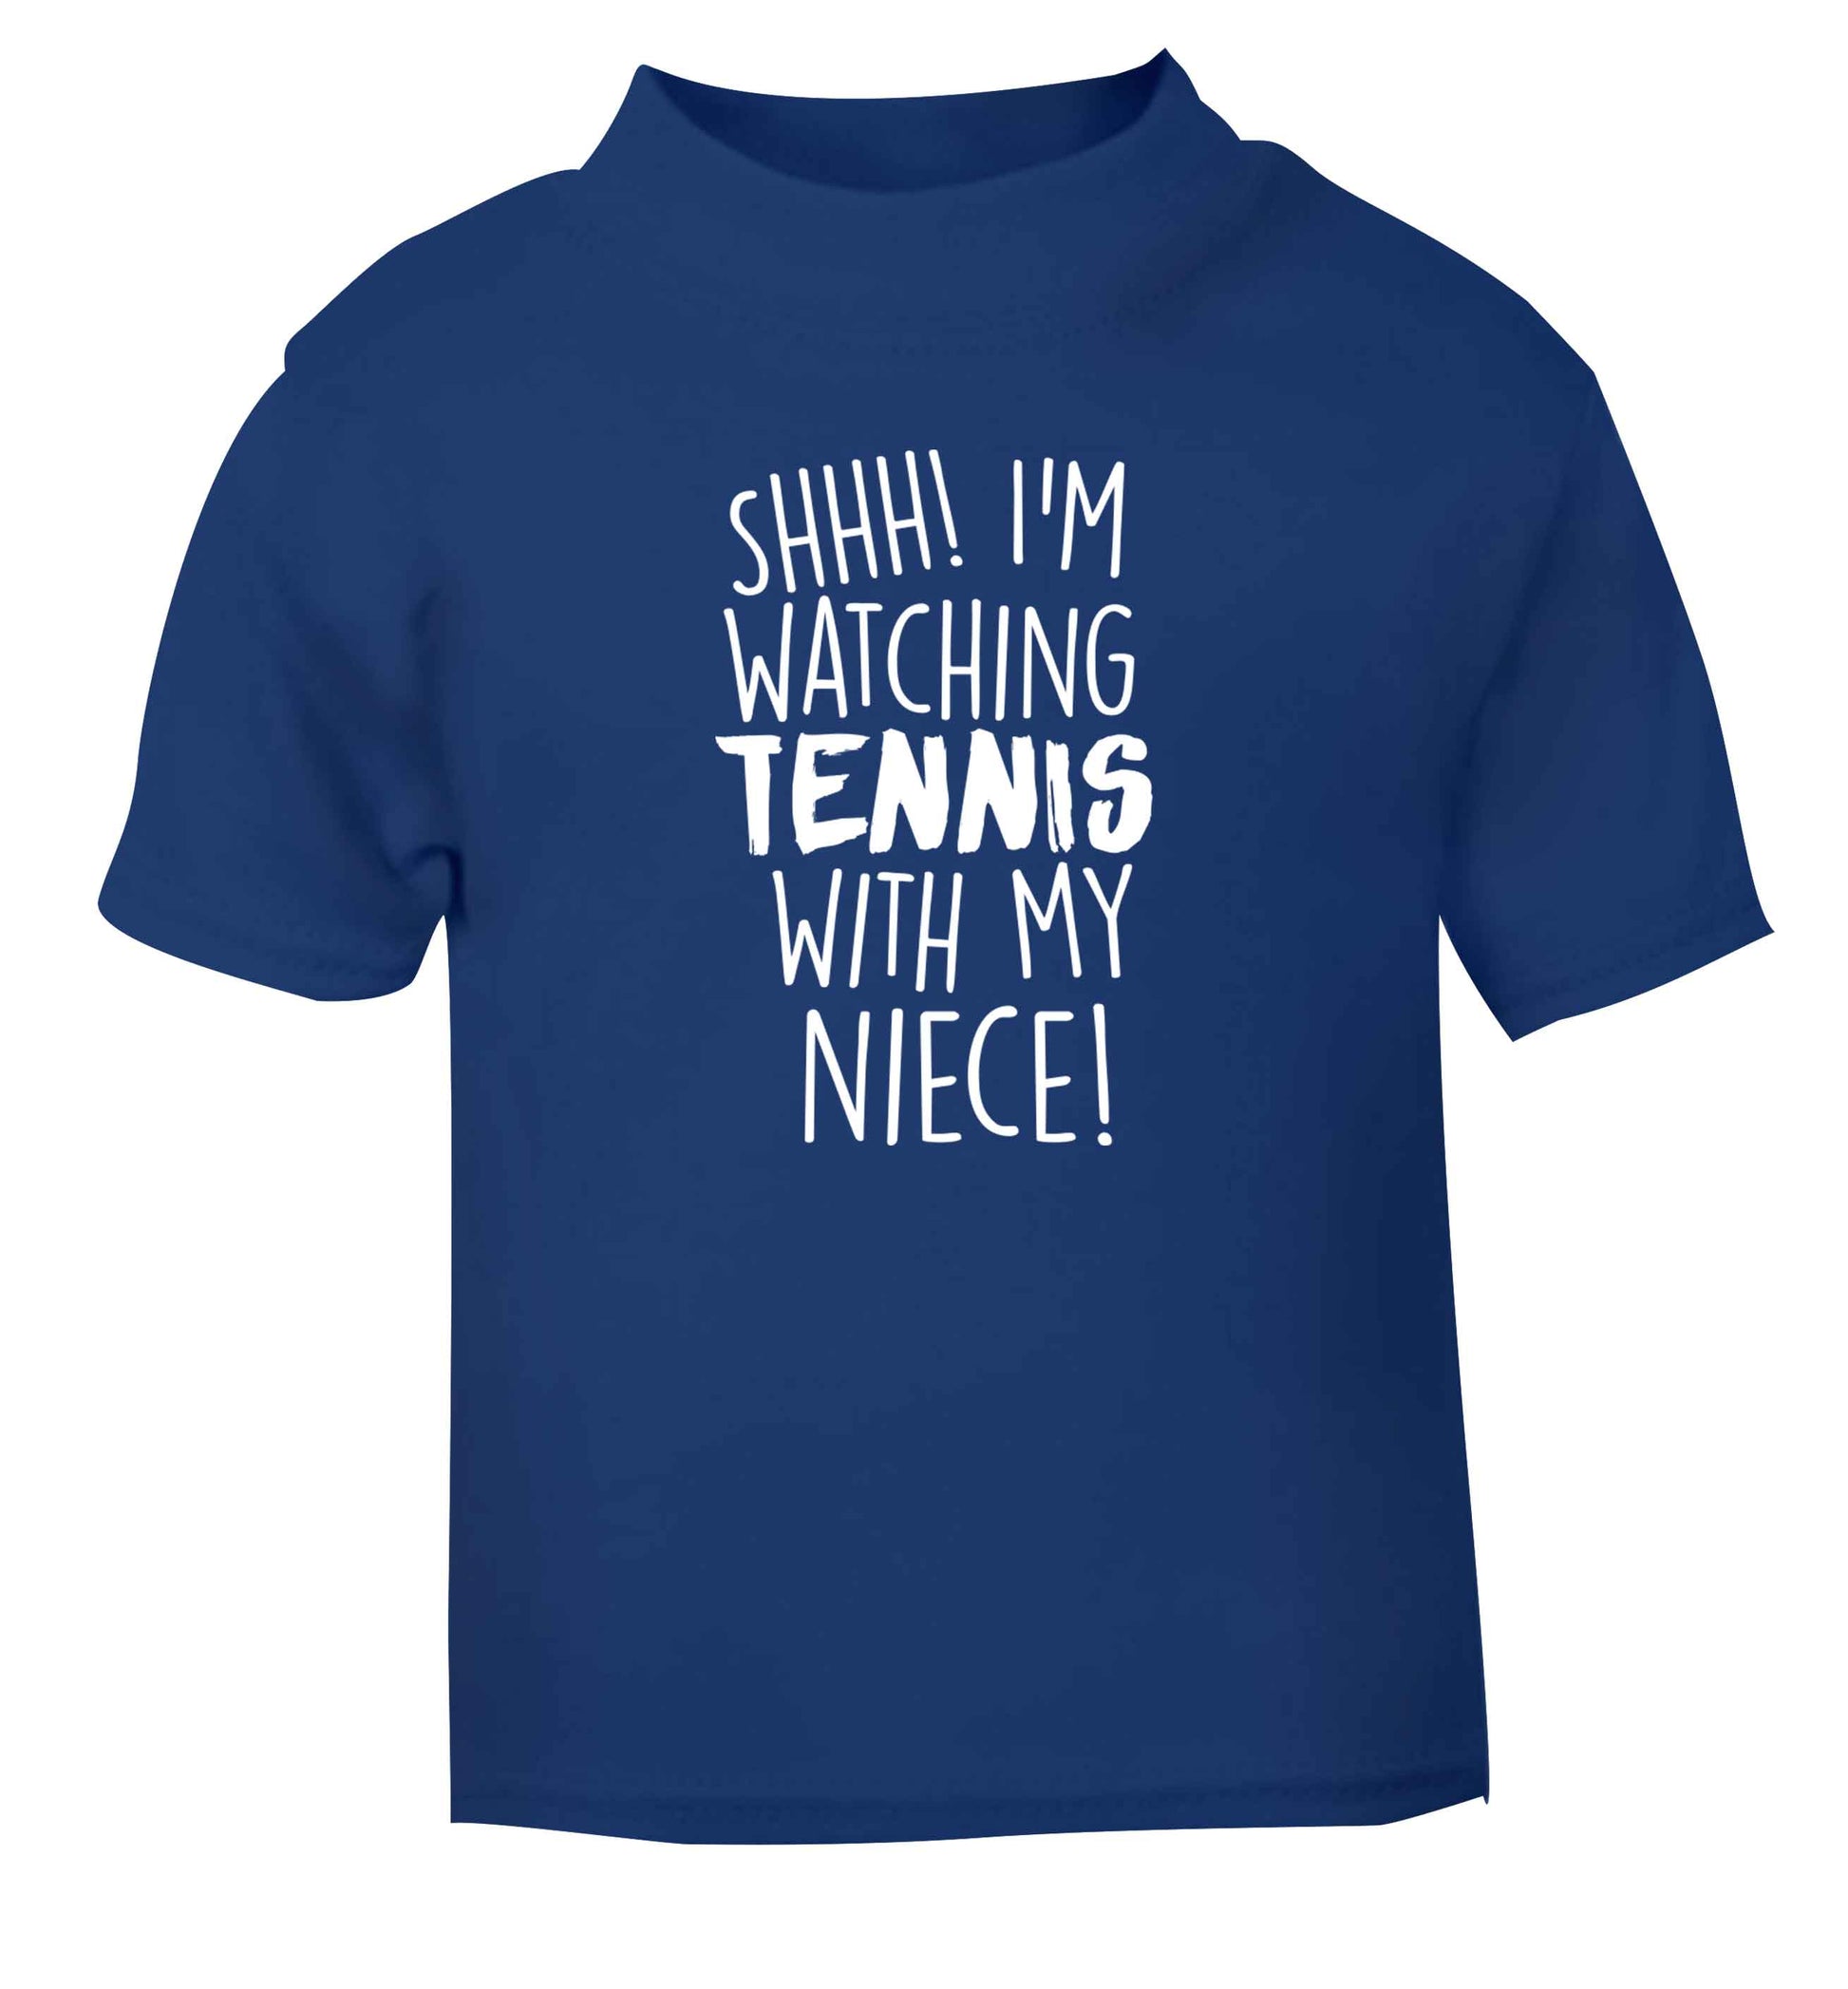 Shh! I'm watching tennis with my niece! blue Baby Toddler Tshirt 2 Years